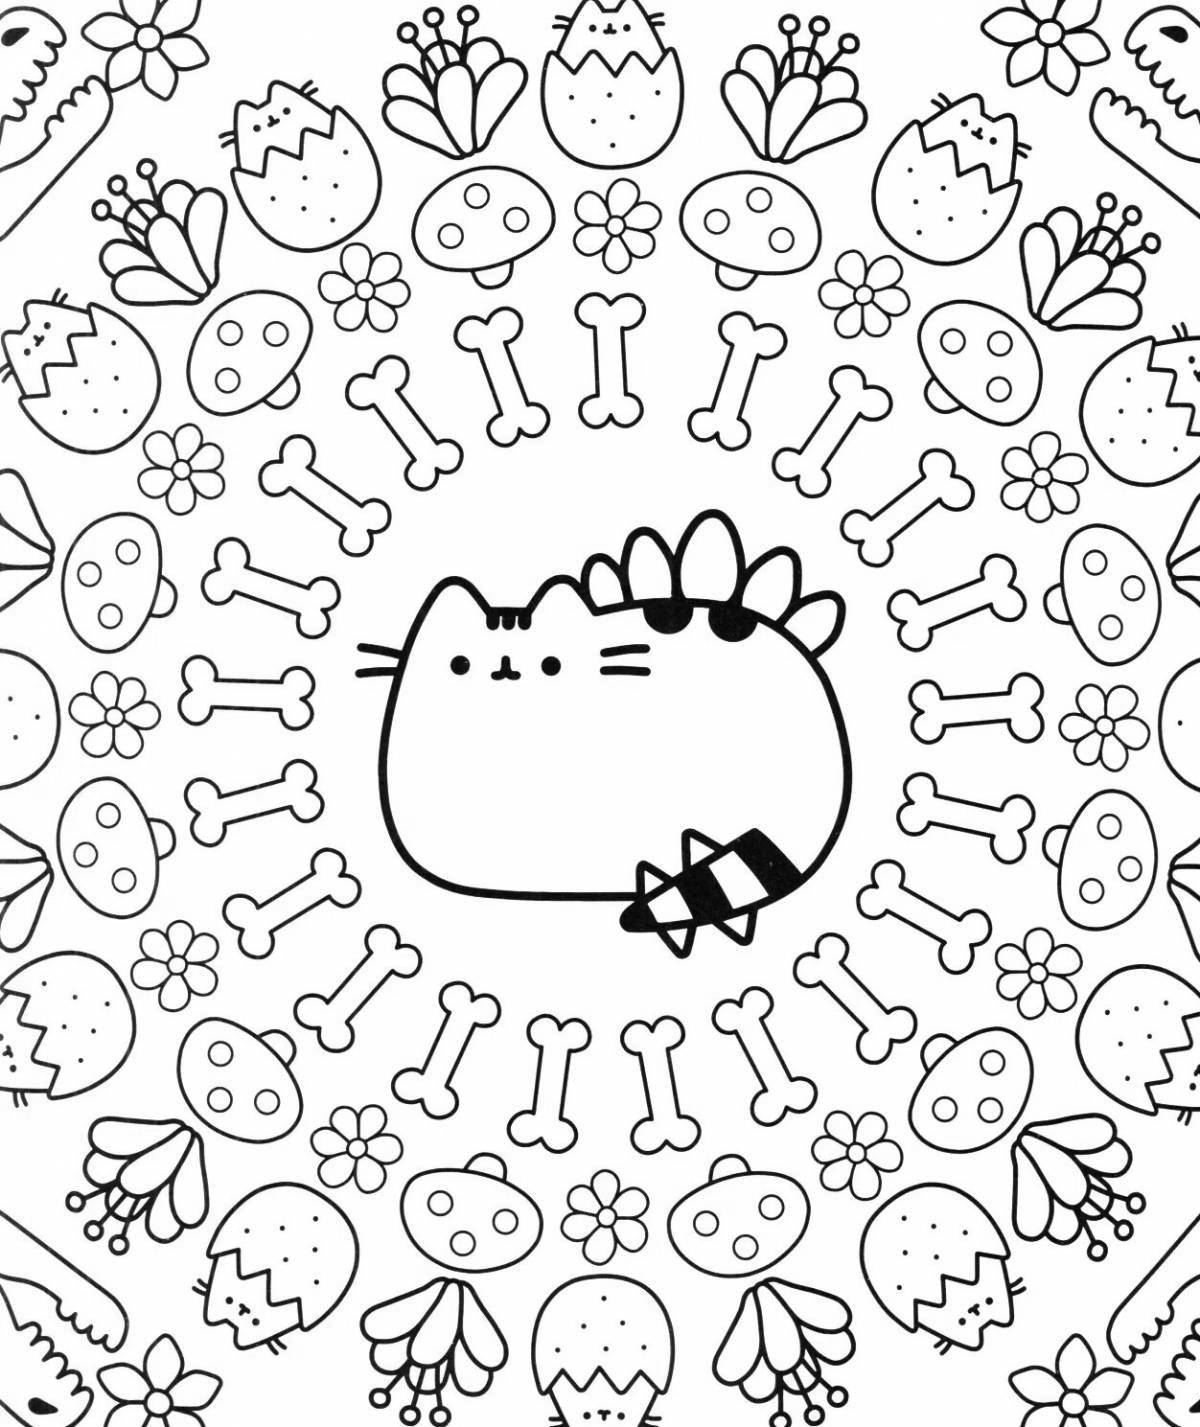 Pushina's fun coloring pages